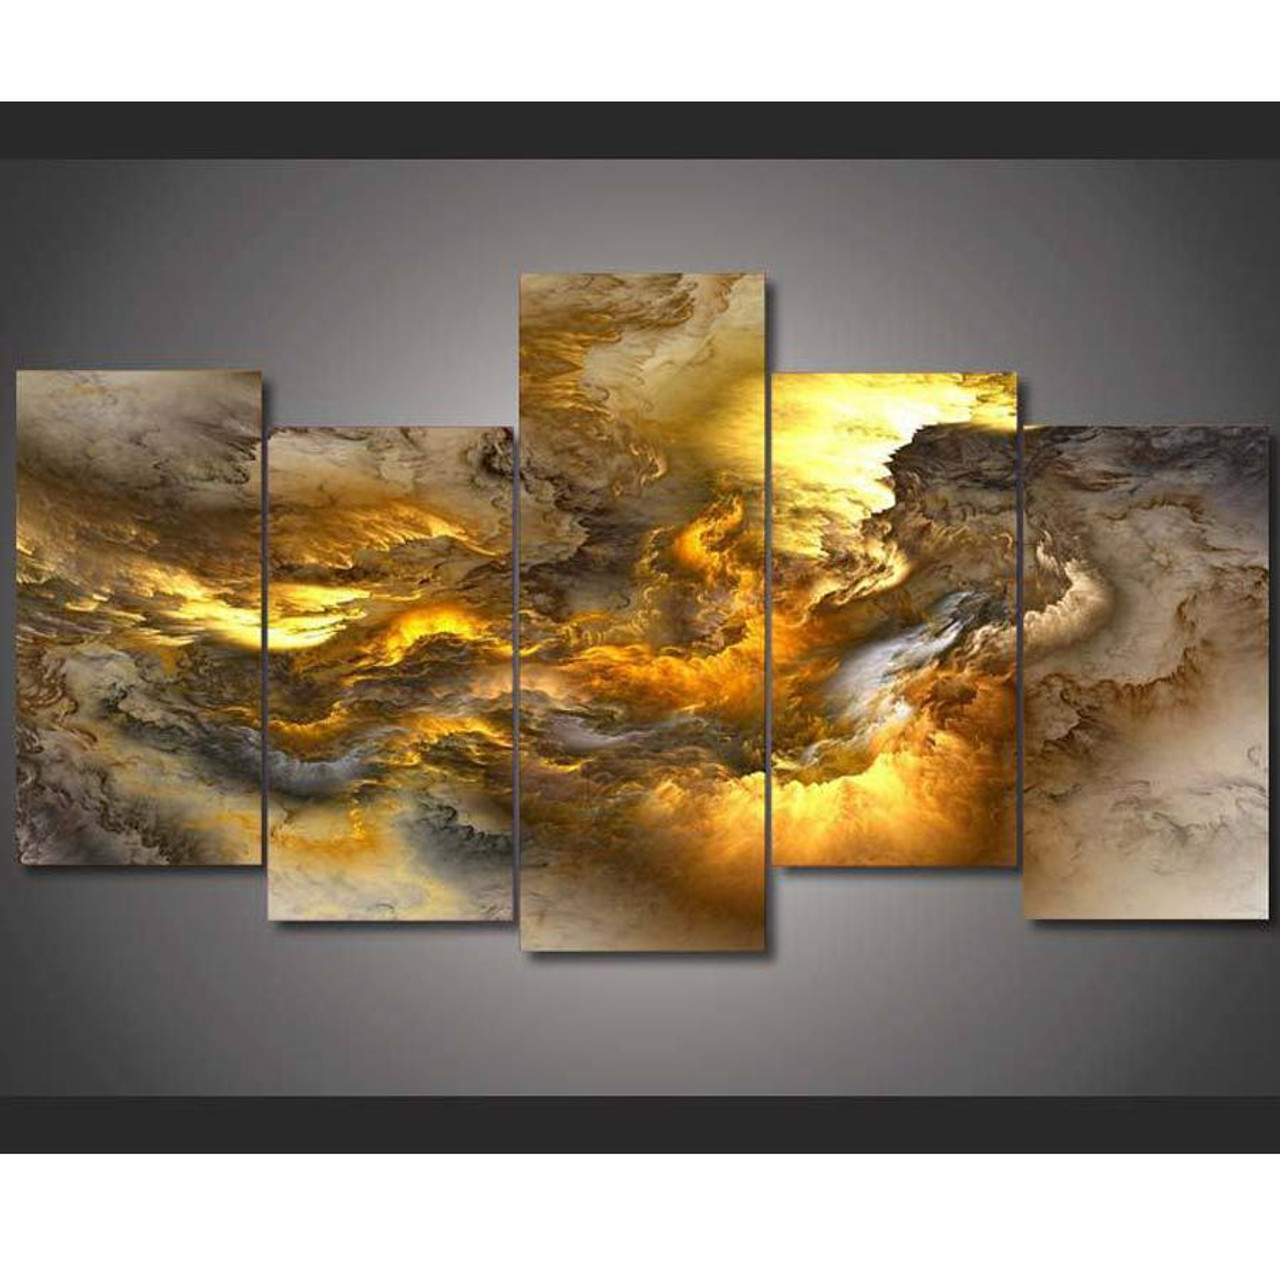 5D Diamond Painting Fire and Clouds 5 Panel Kit